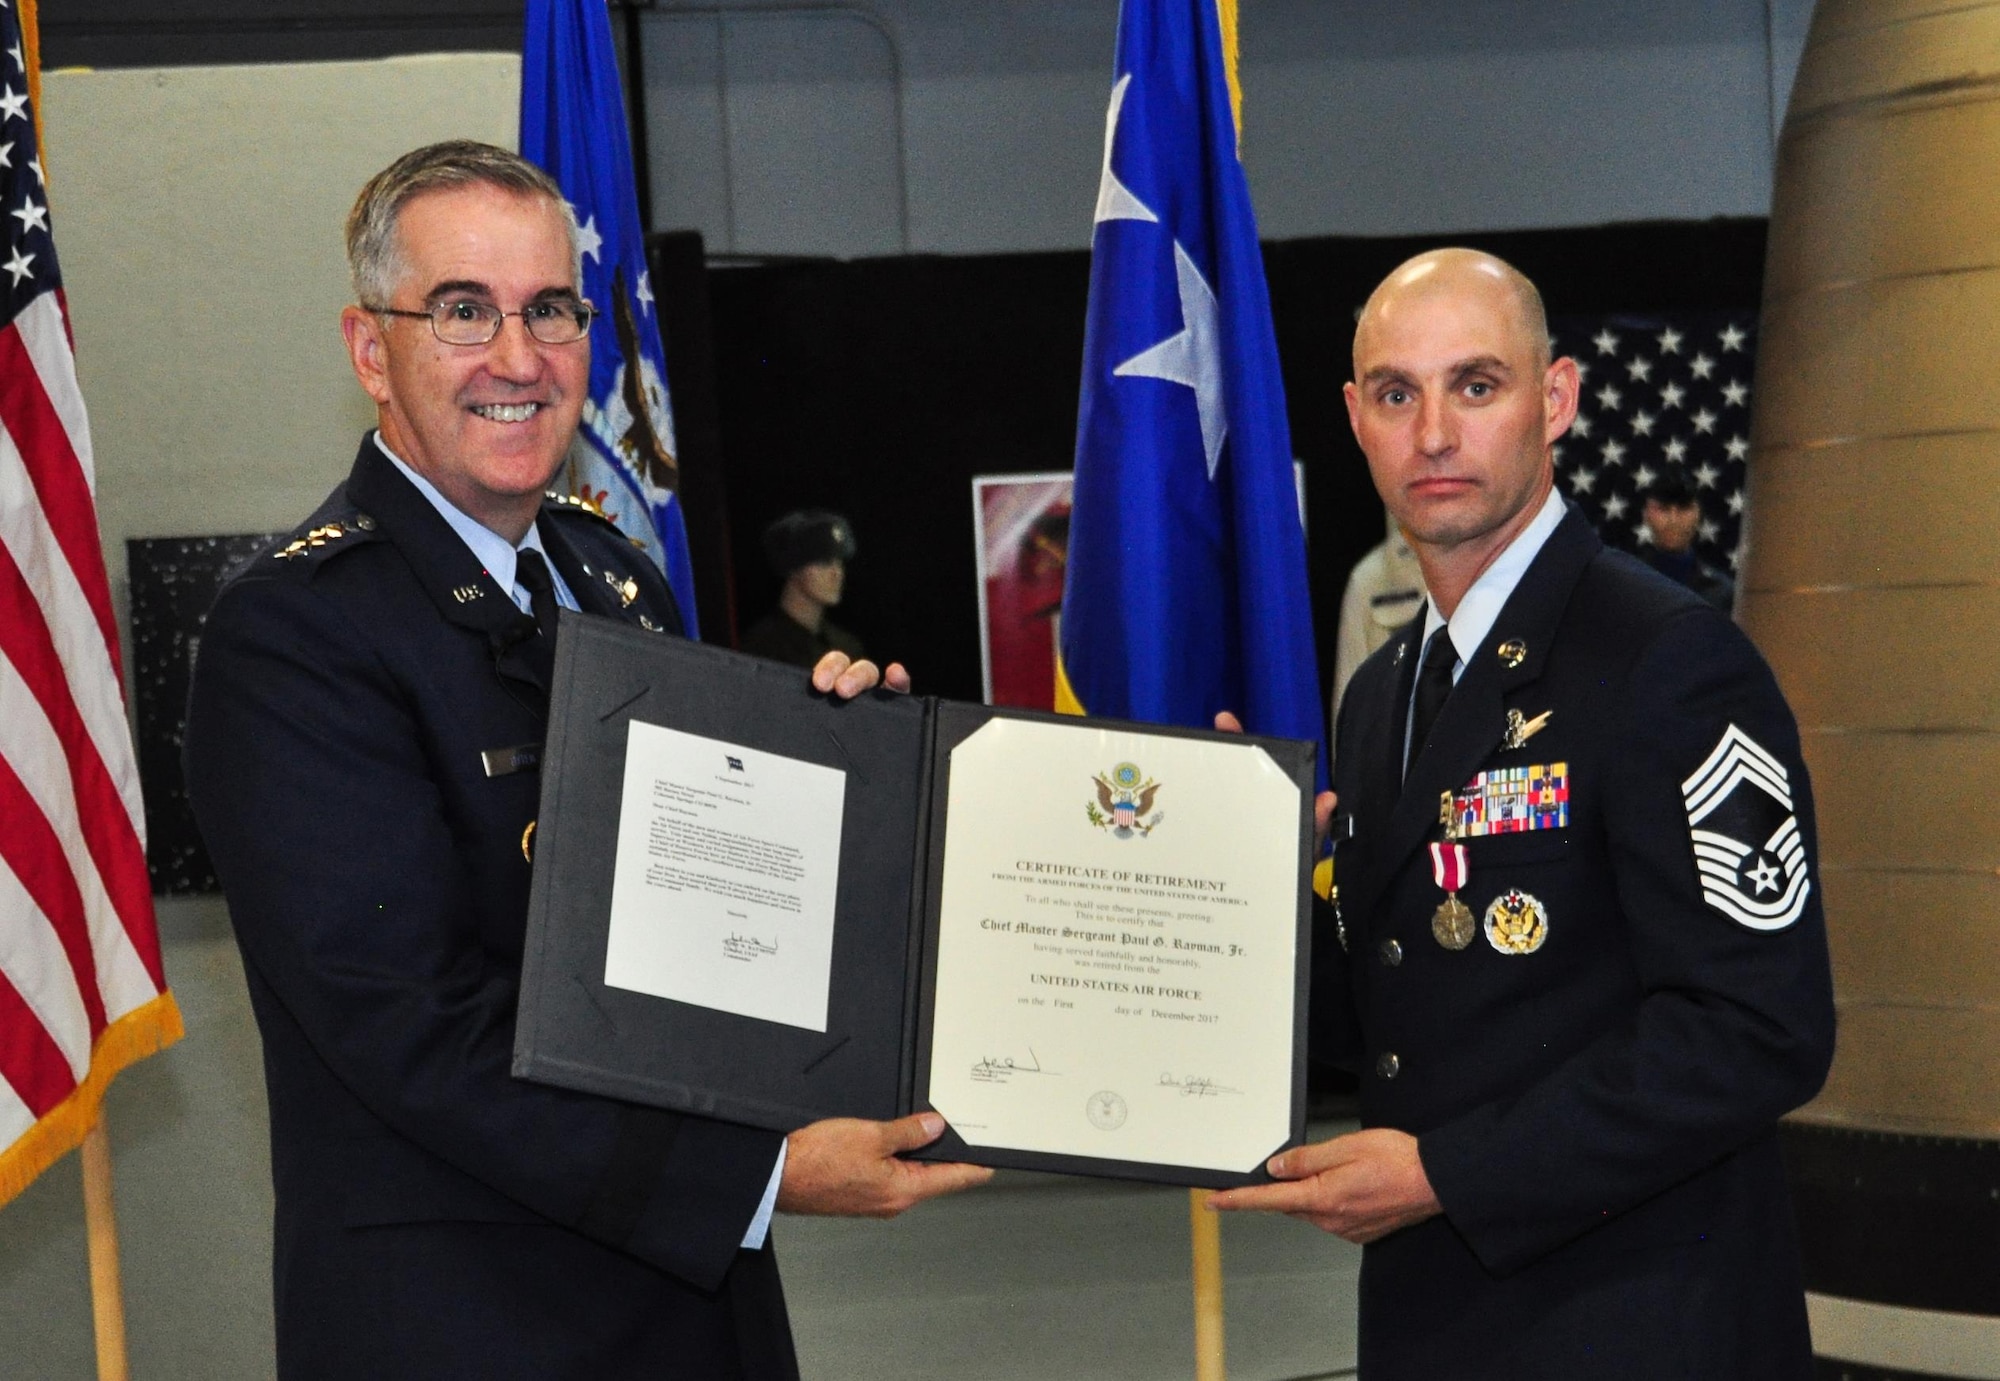 Chief Master Sgt. Paul Rayman and Gen. John E. Hyten, Commander, United States Strategic Command, pose for a photo during Rayman's retirement ceremony at the Peterson Air Force Base Air and Space Museum on Saturday, Sep. 9, 2017.